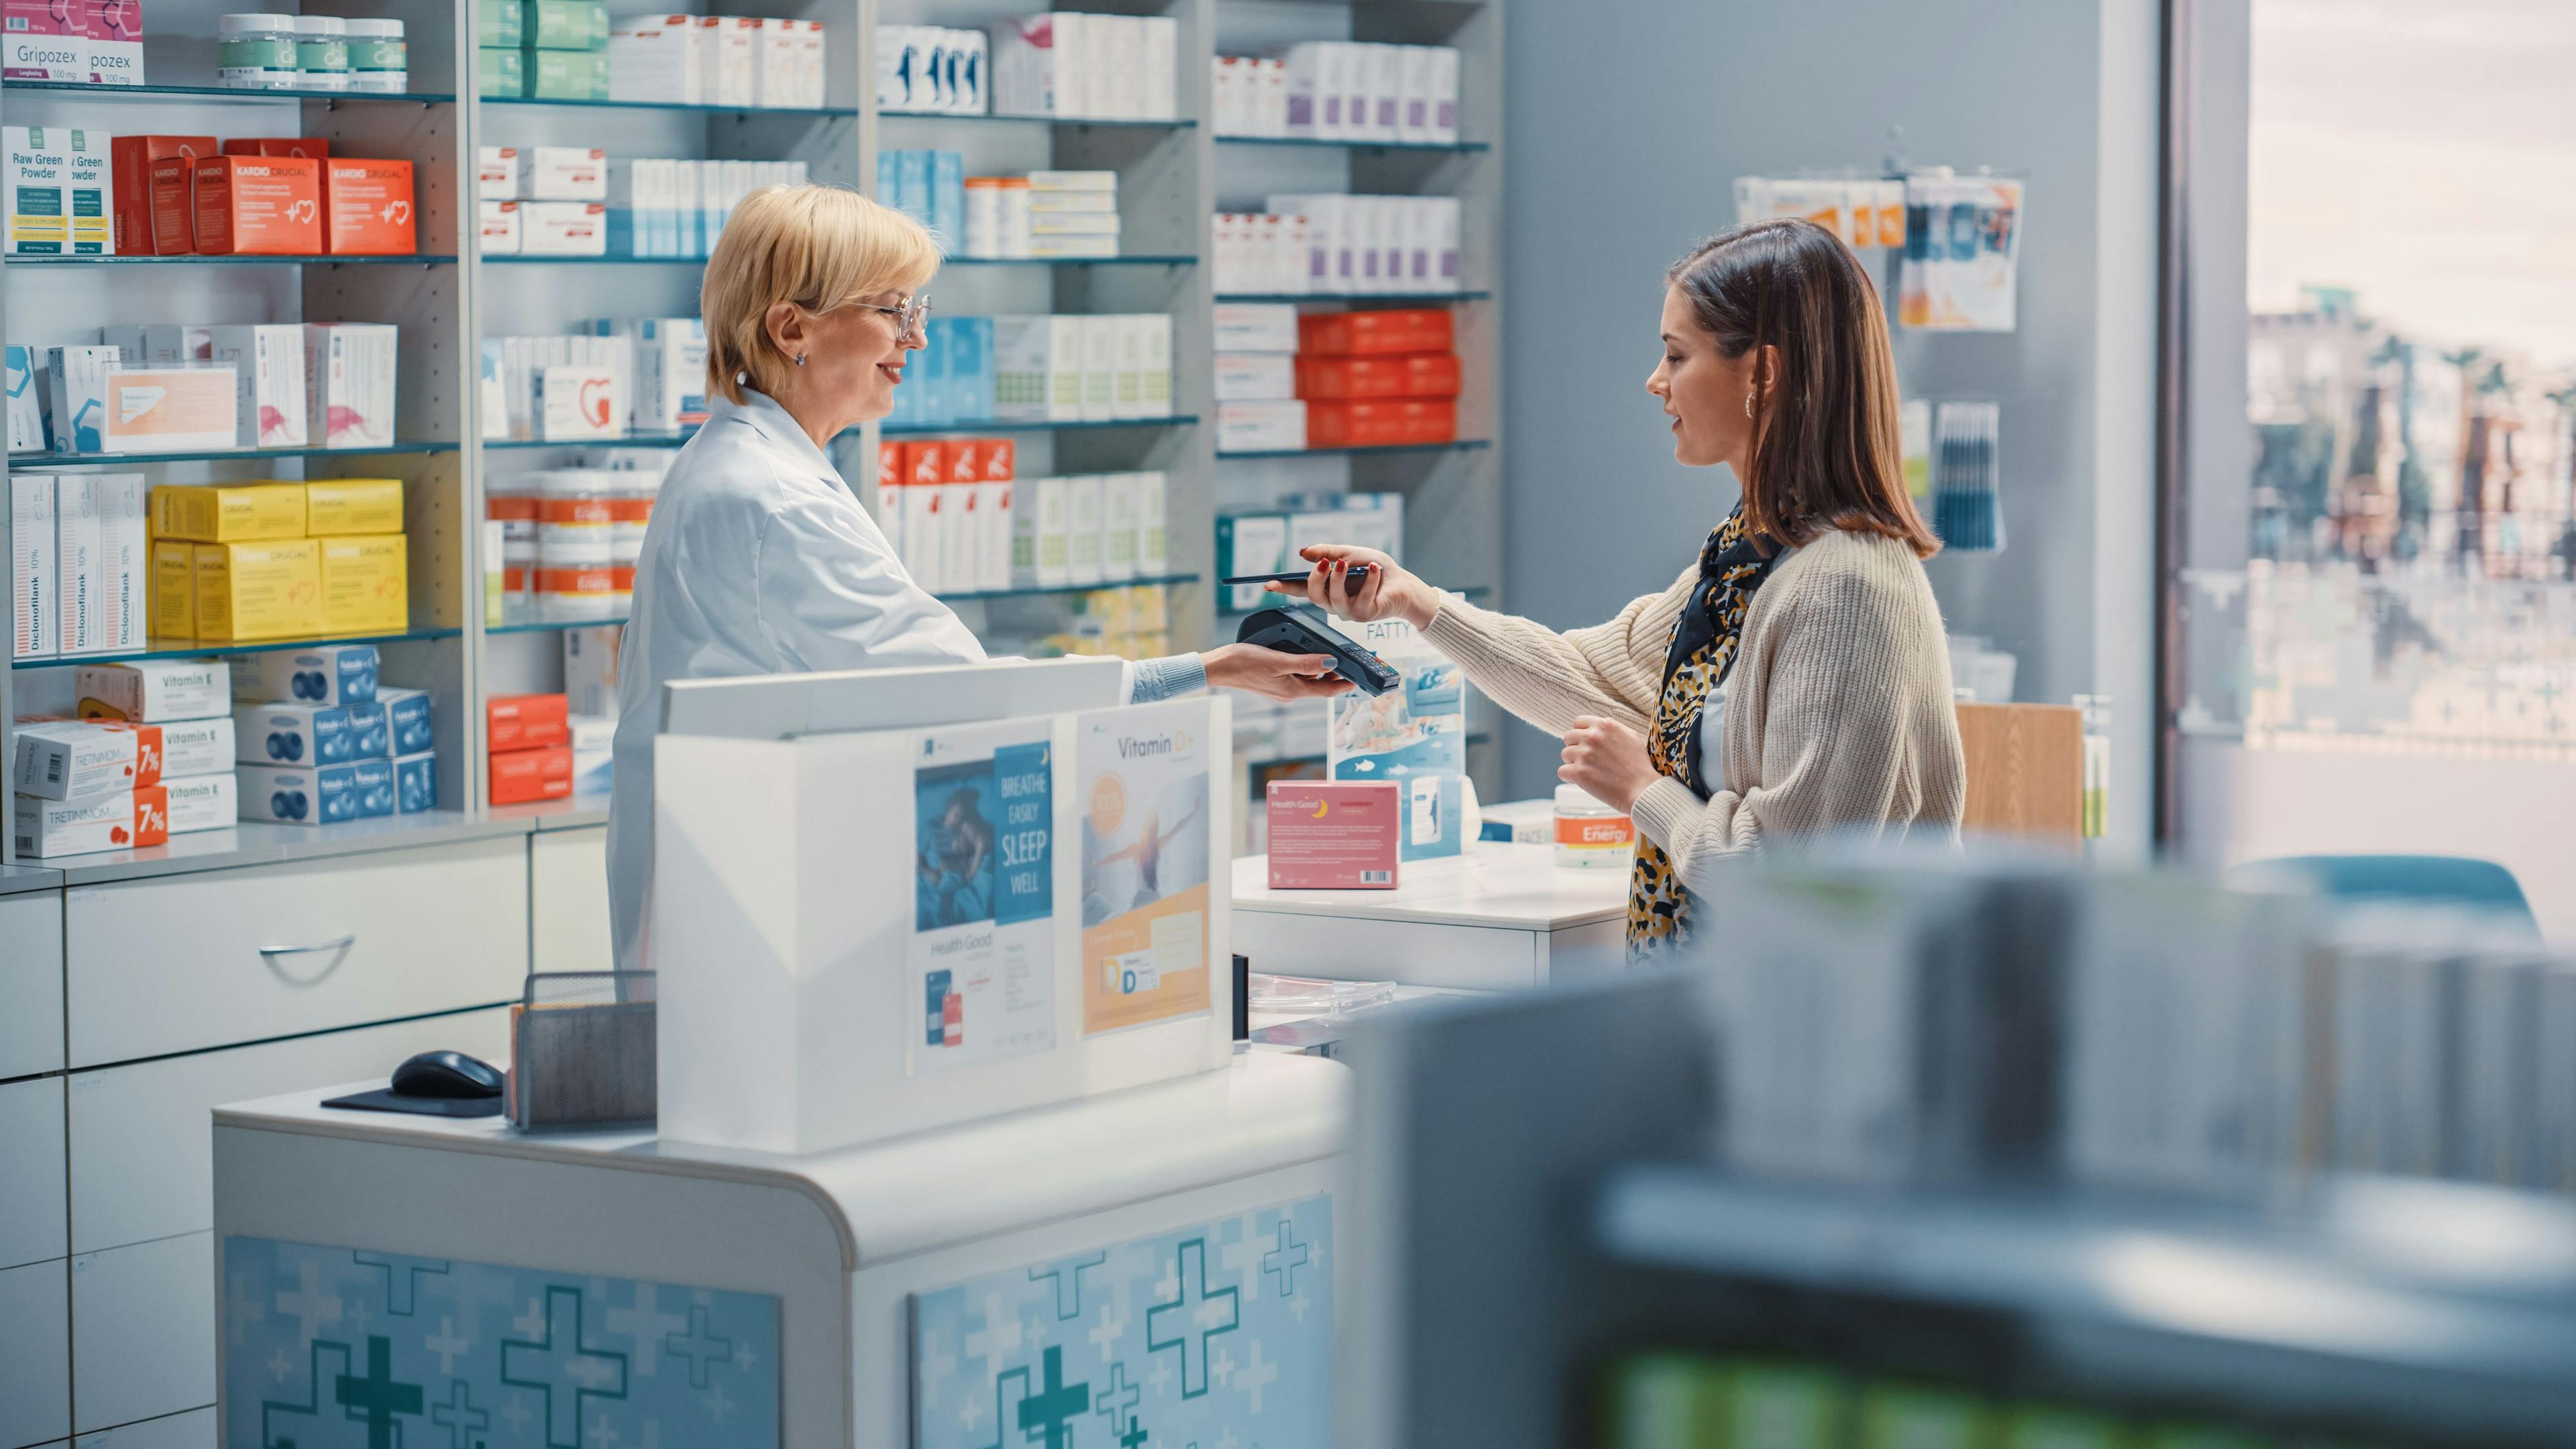 What are best practices for buying or selling a pharmacy? / Gorodenkoff - stock.adobe.com